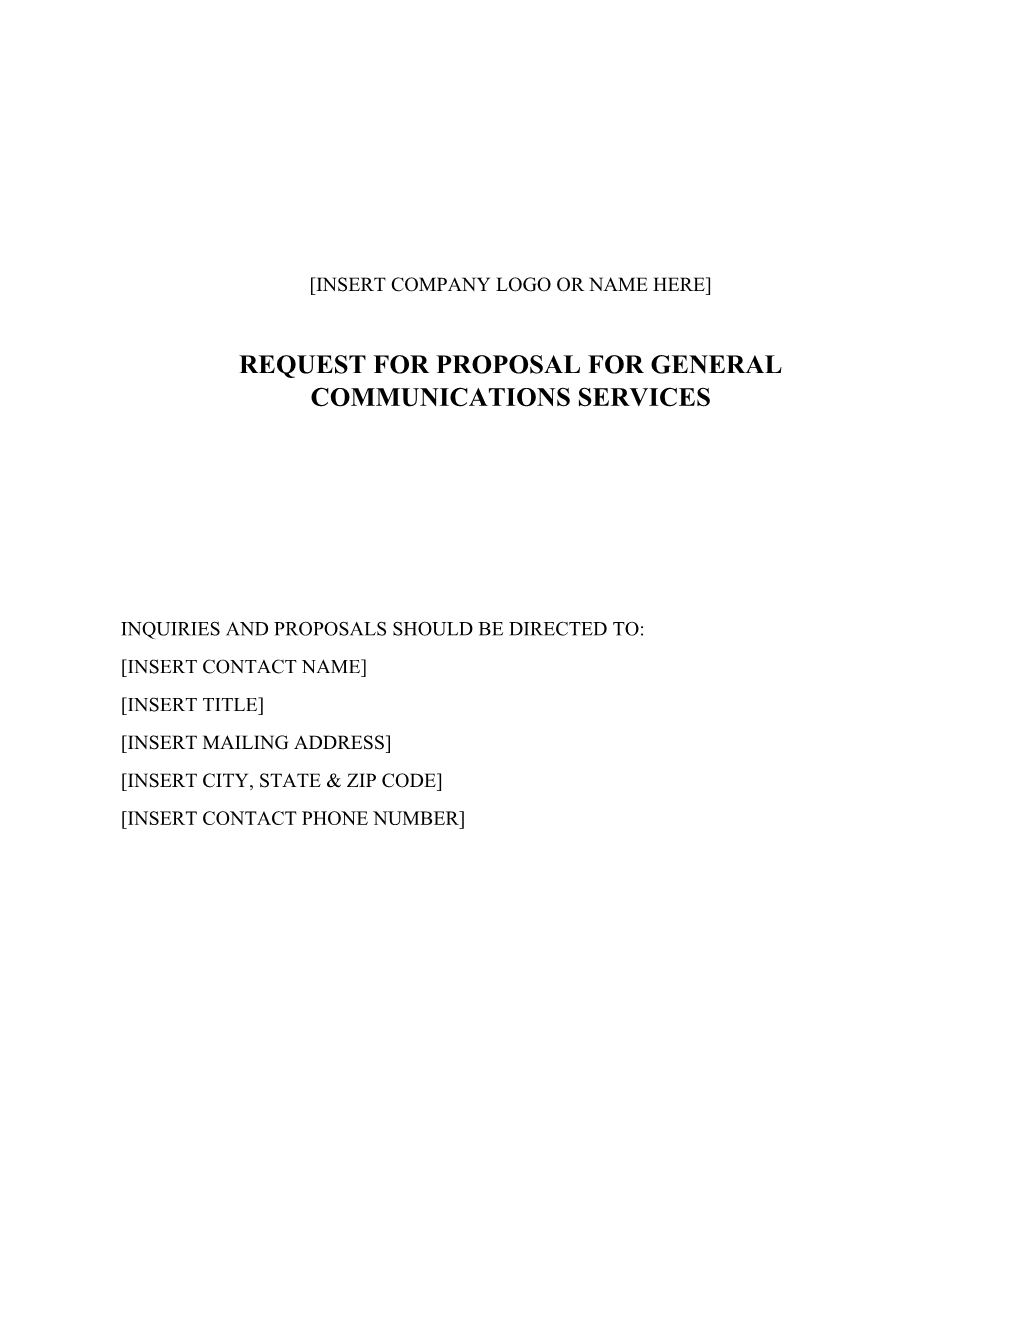 Request for Proposal for General Communications Services